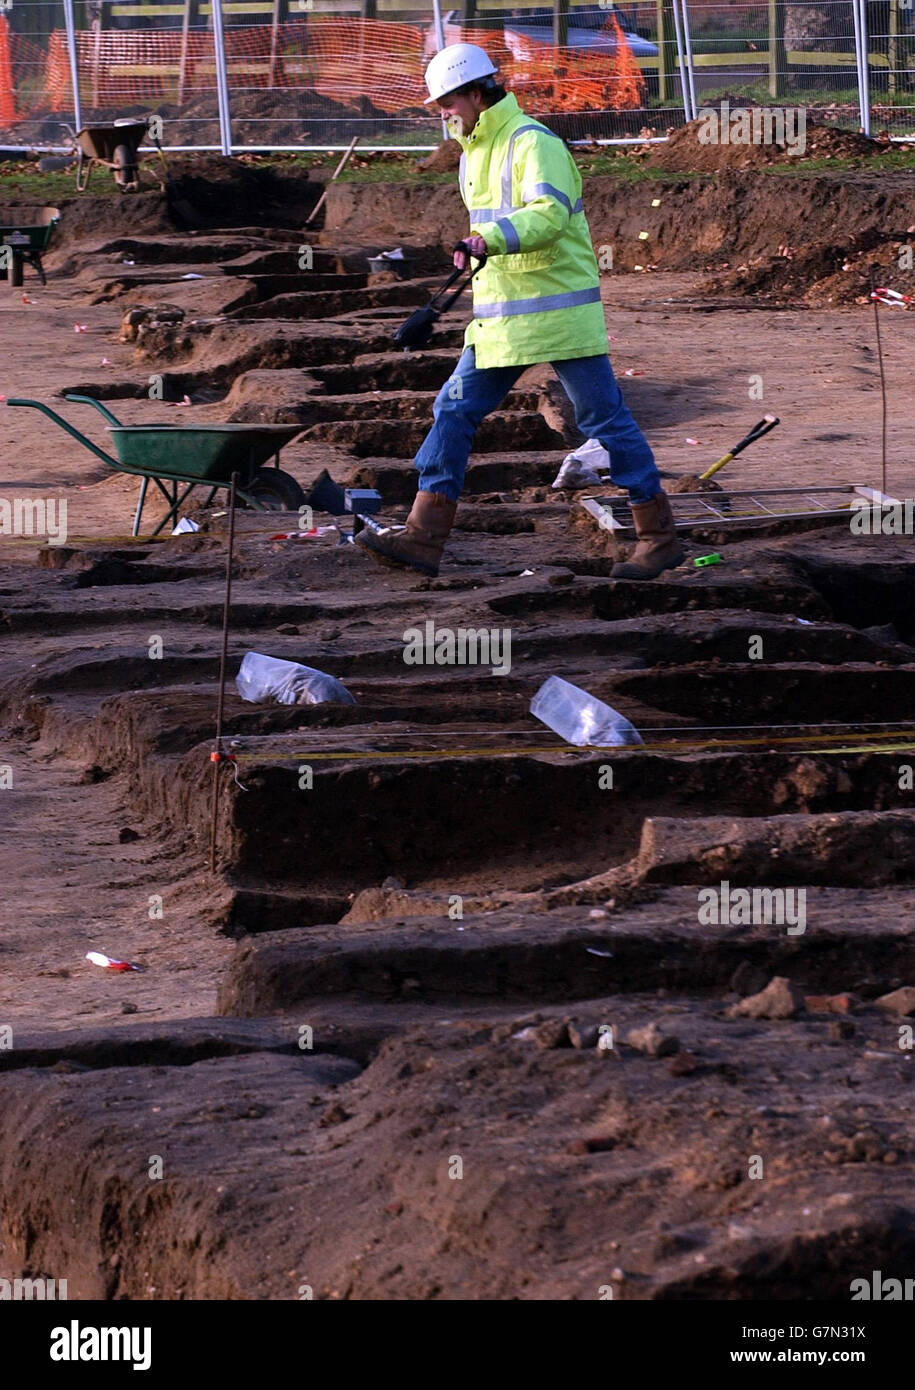 Archaeologist Robert Masefield who works on a building site where excavation works for a new housing development have unearthed elements of a walled structure over 350m long and 70m wide thought to represent a Roman Chariot racing arena or Roman Circus and is the only verified example of a circus in Britain. Stock Photo